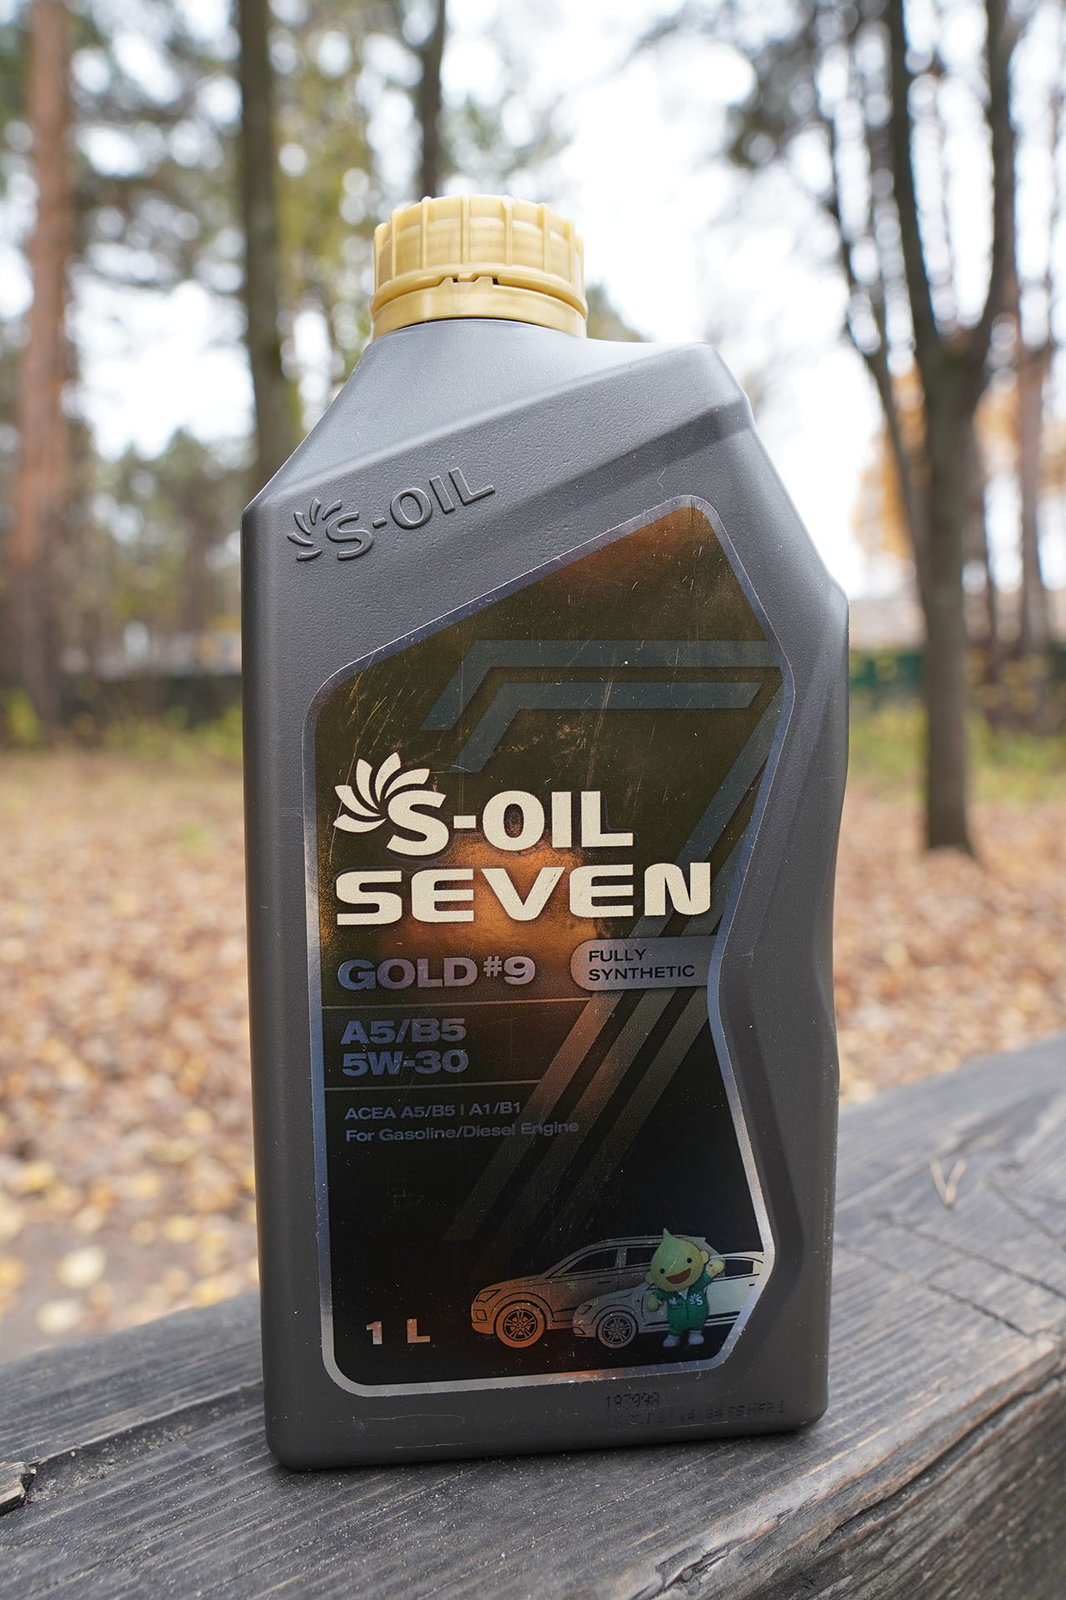 Масло gold 9. S-Oil Seven Gold #9 5w-30 a5/b5. S-Oil Seven 5w-30 Gold 9. S Oil 5w30 a5 b5. S Oil Gold 5w30 c3.